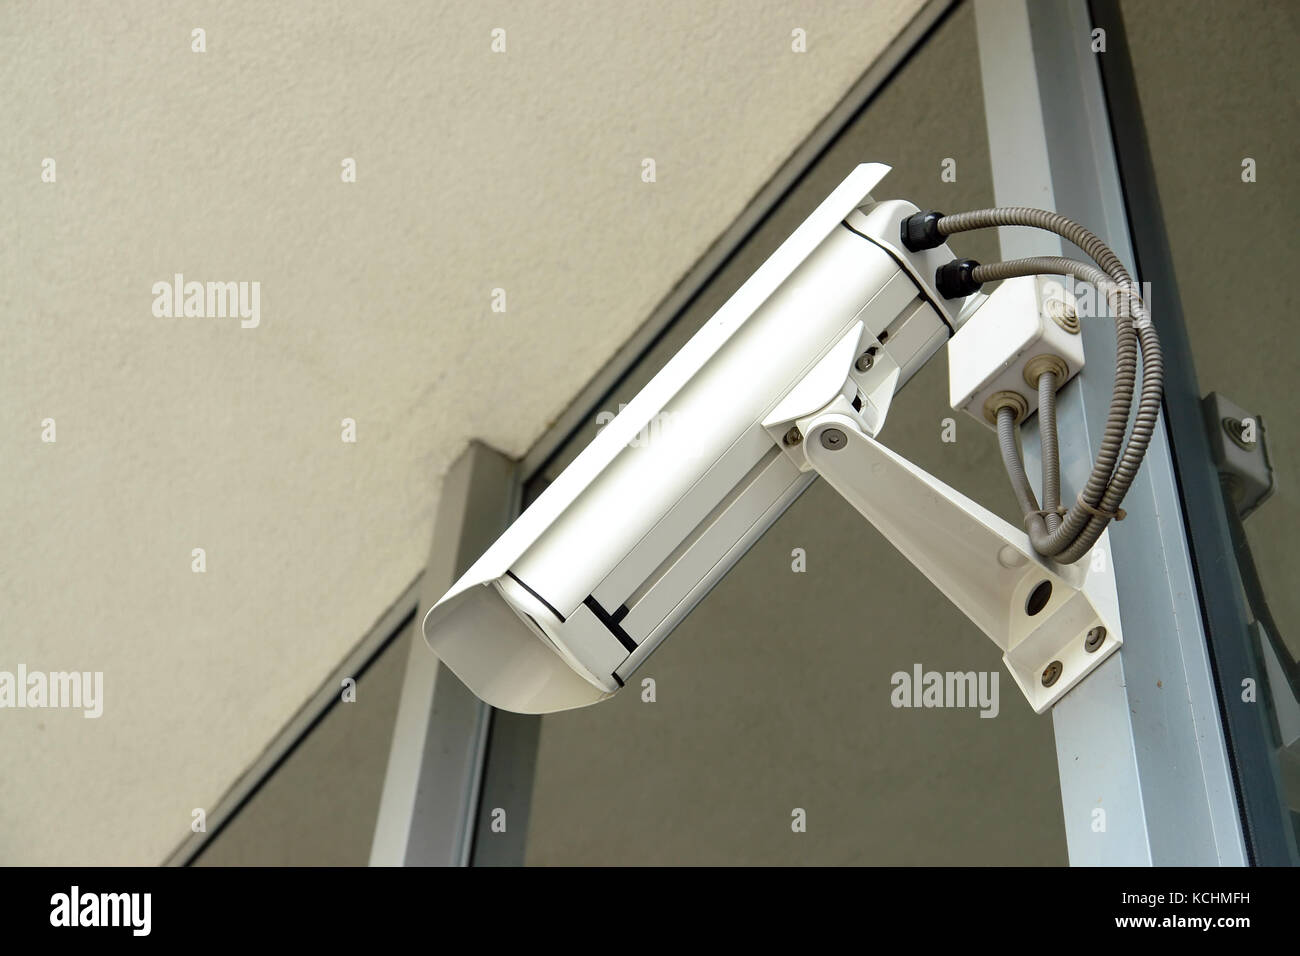 Security cctv camera fixed to office window frame Stock Photo